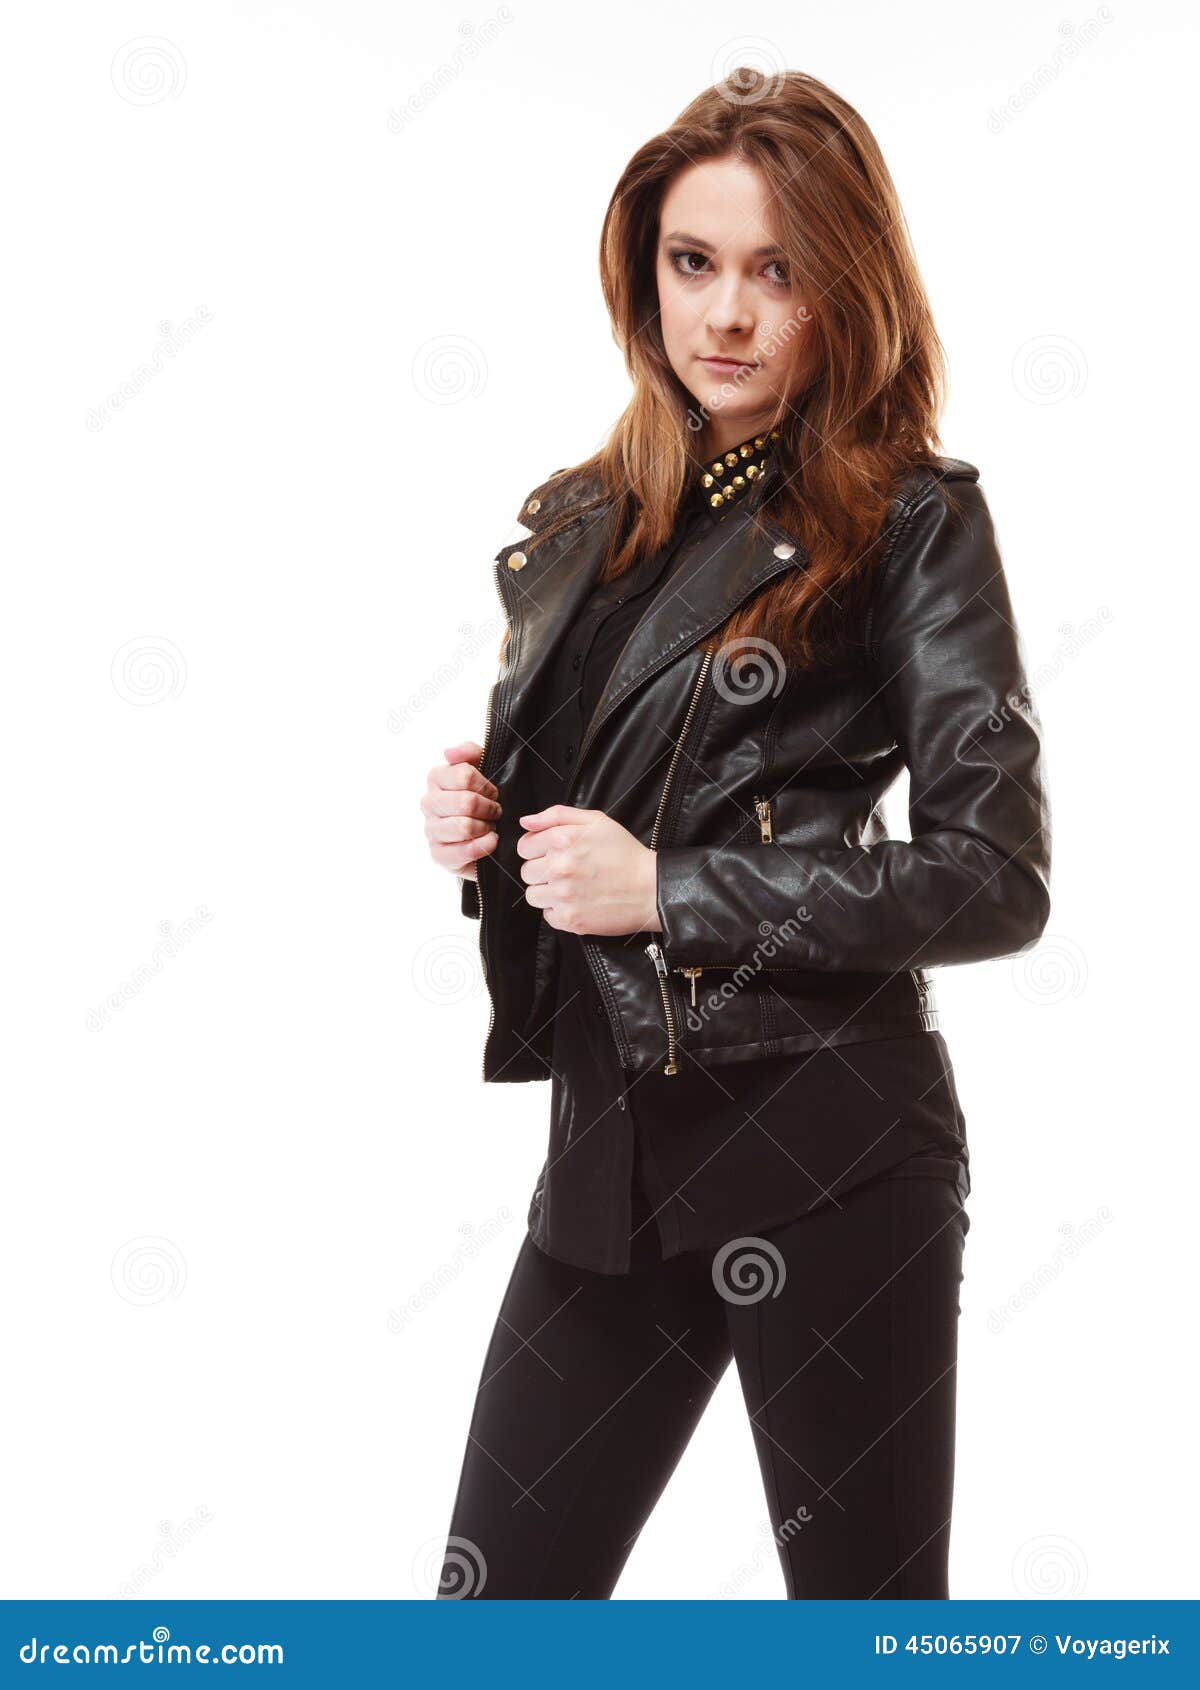 People Concept - Teenage Girl in Casual Clothes Stock Image - Image of ...